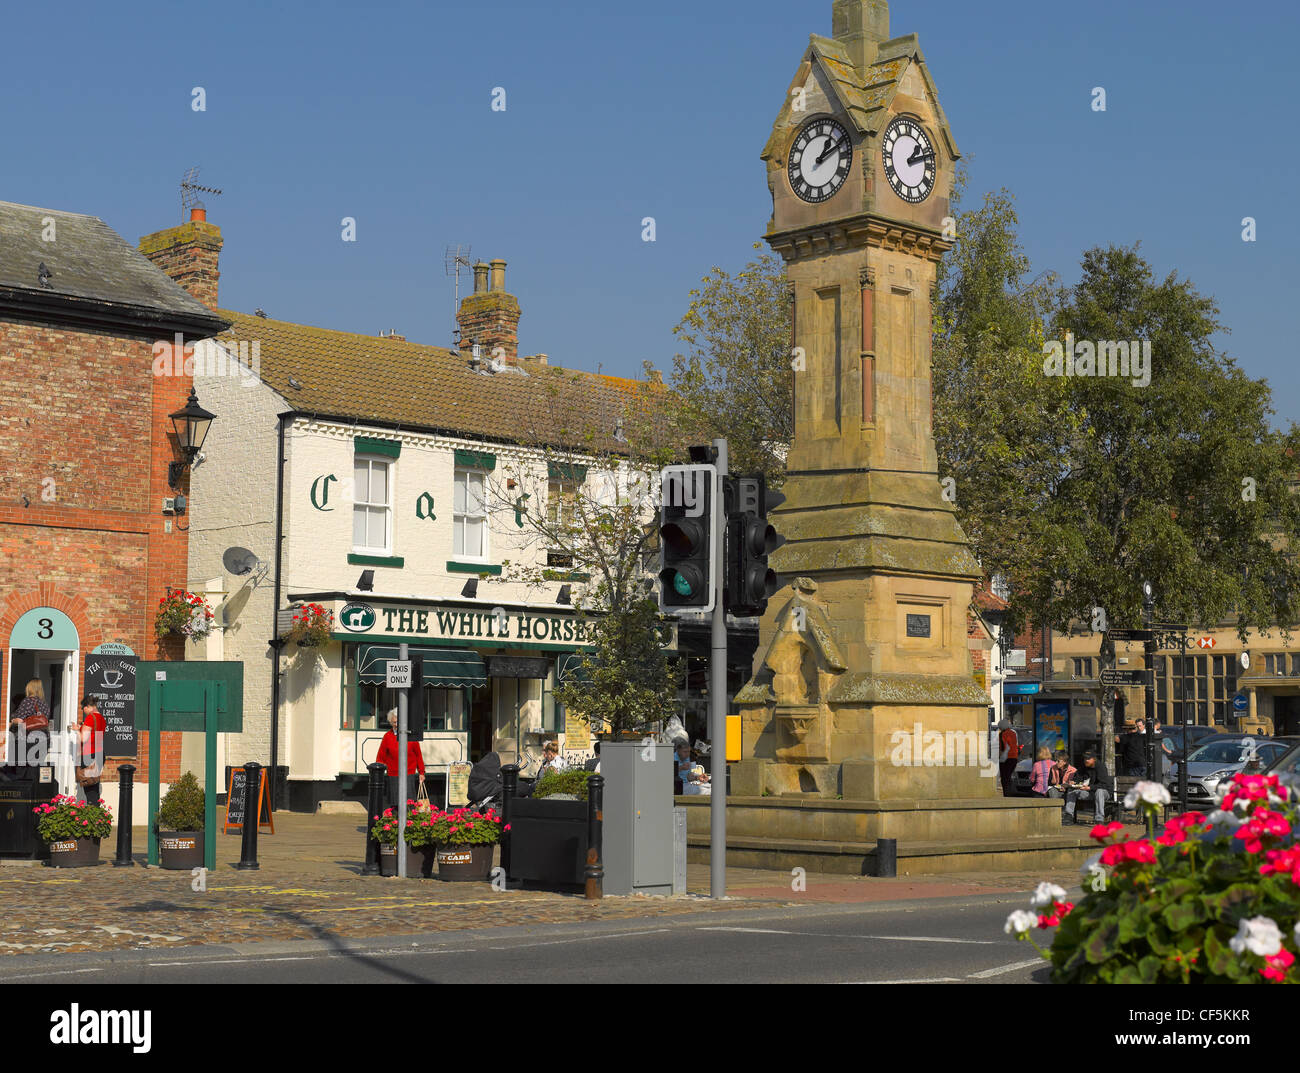 The clock tower in Market Place in the small market town of Thirsk. Stock Photo